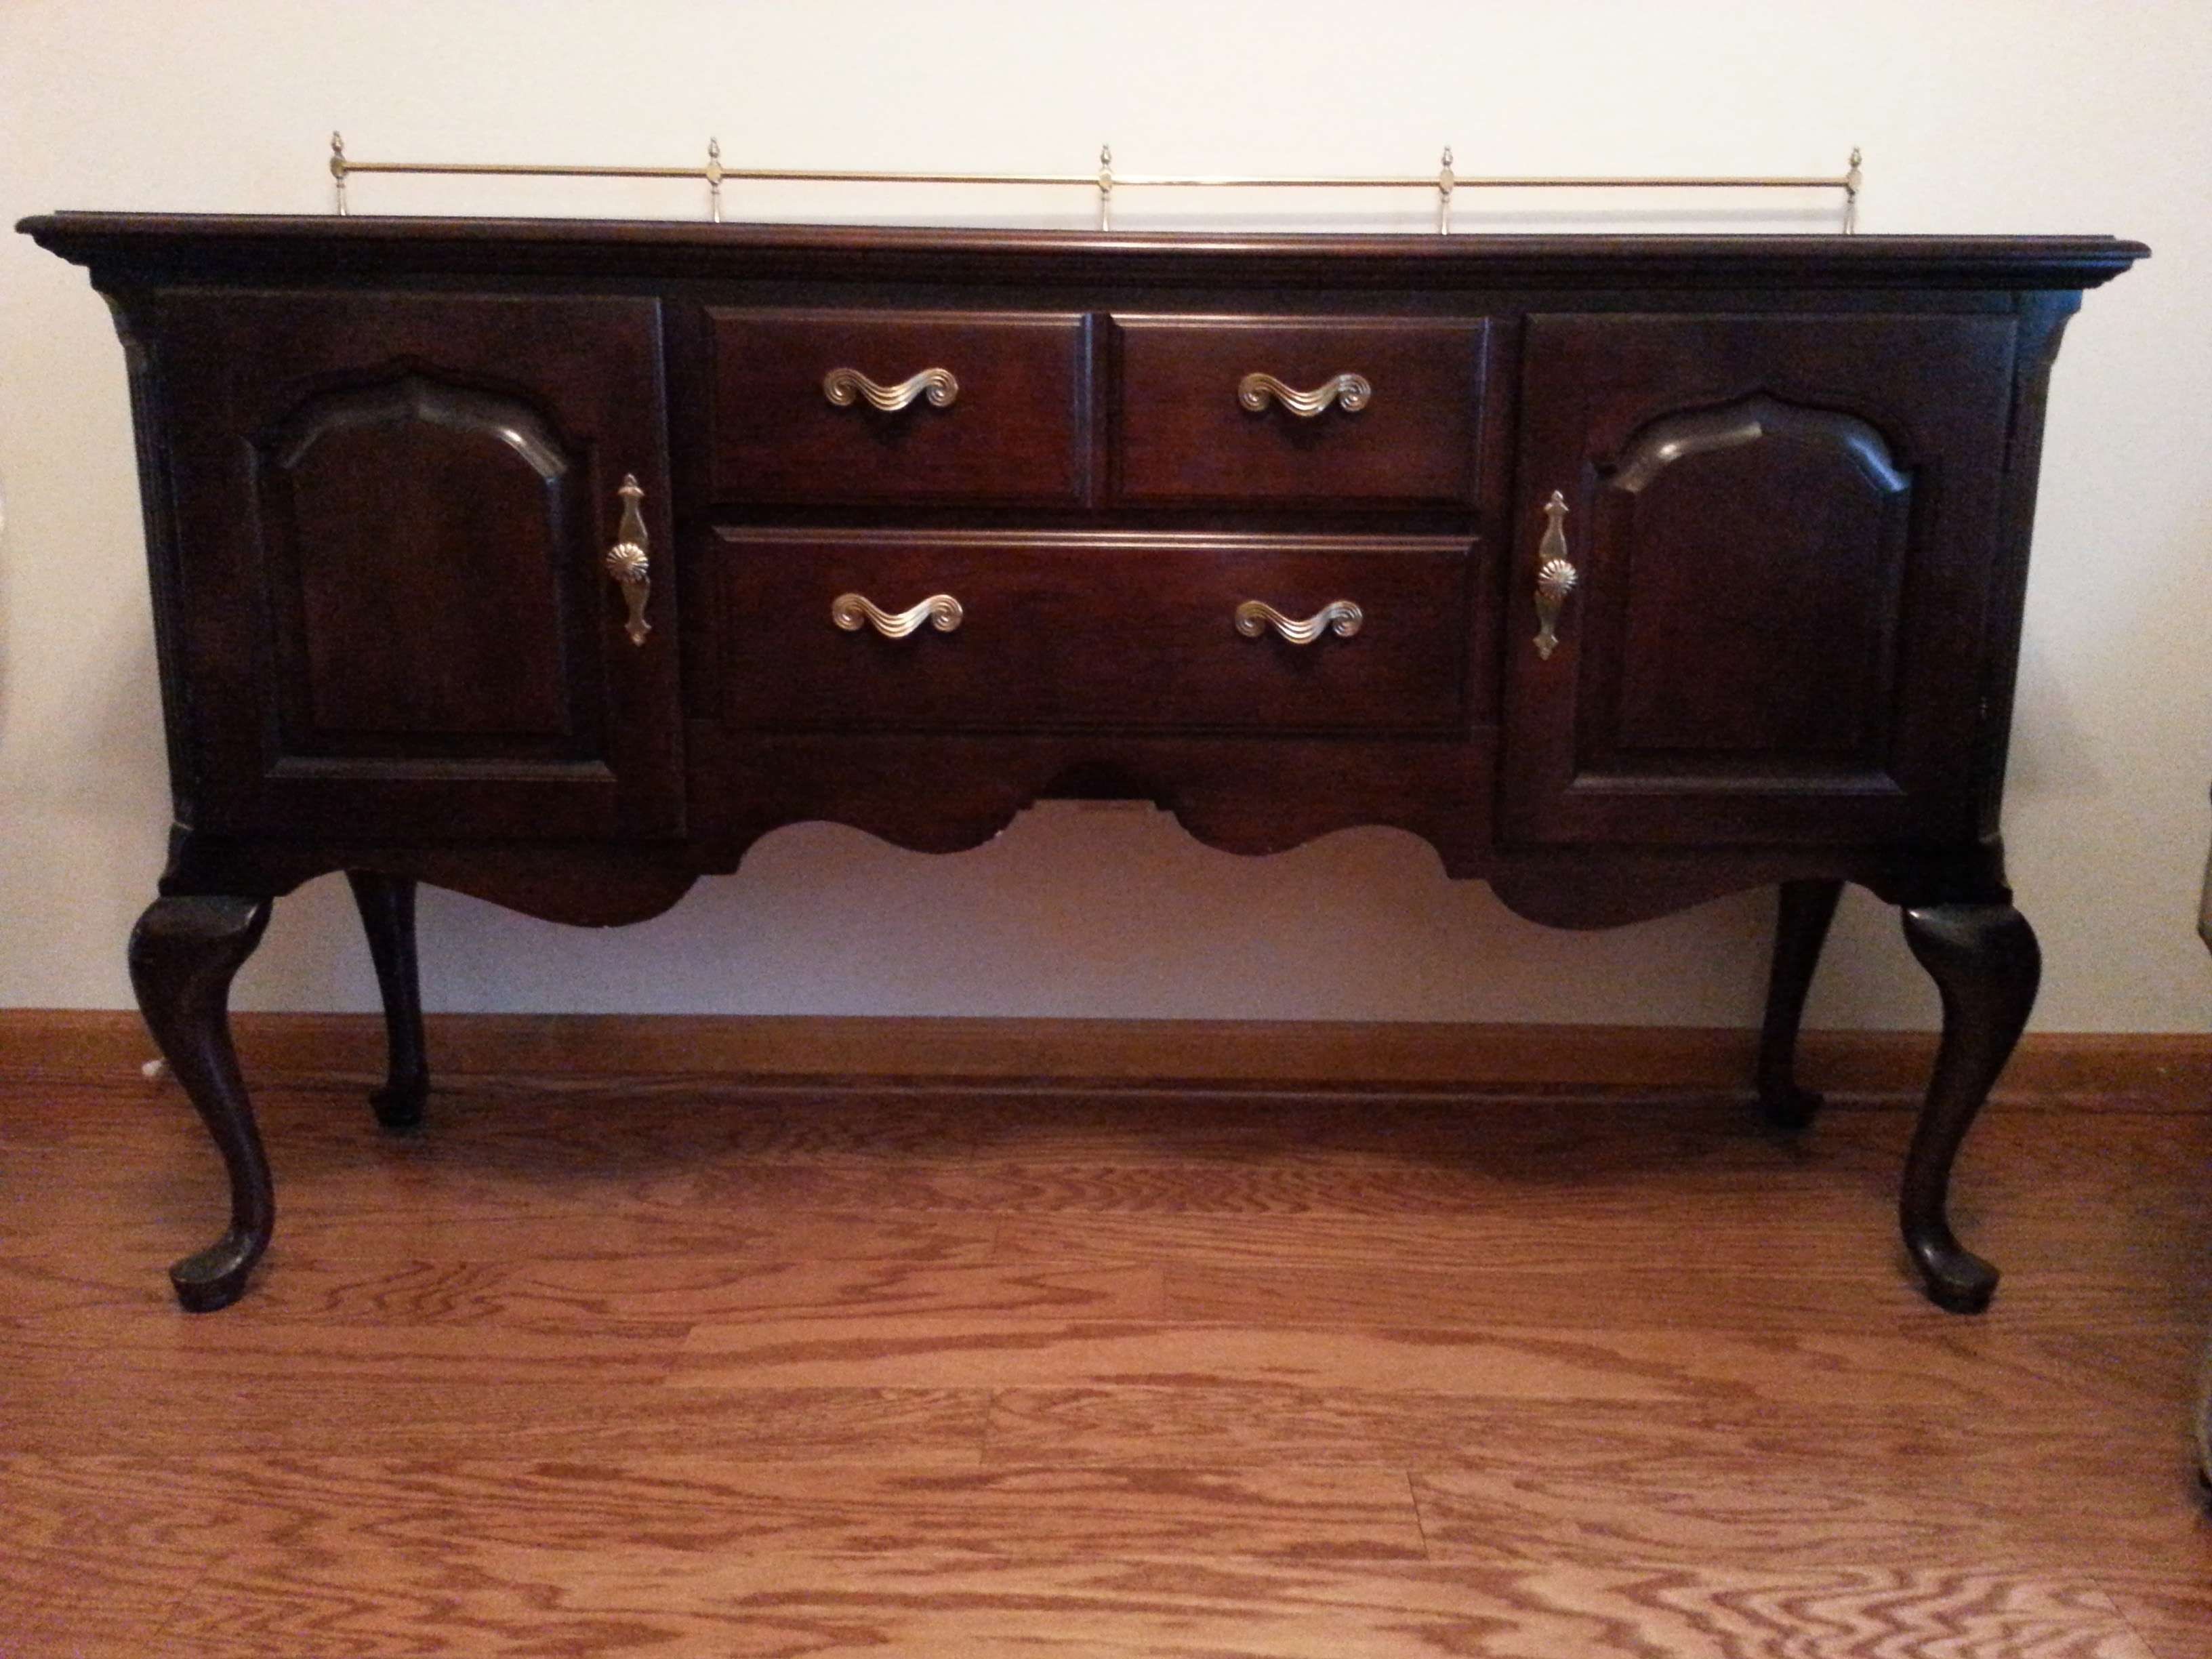 Furniture: Antique Dark Sideboard Buffet With Three Drawers On With Regard To Antique Buffet Sideboards (View 9 of 20)